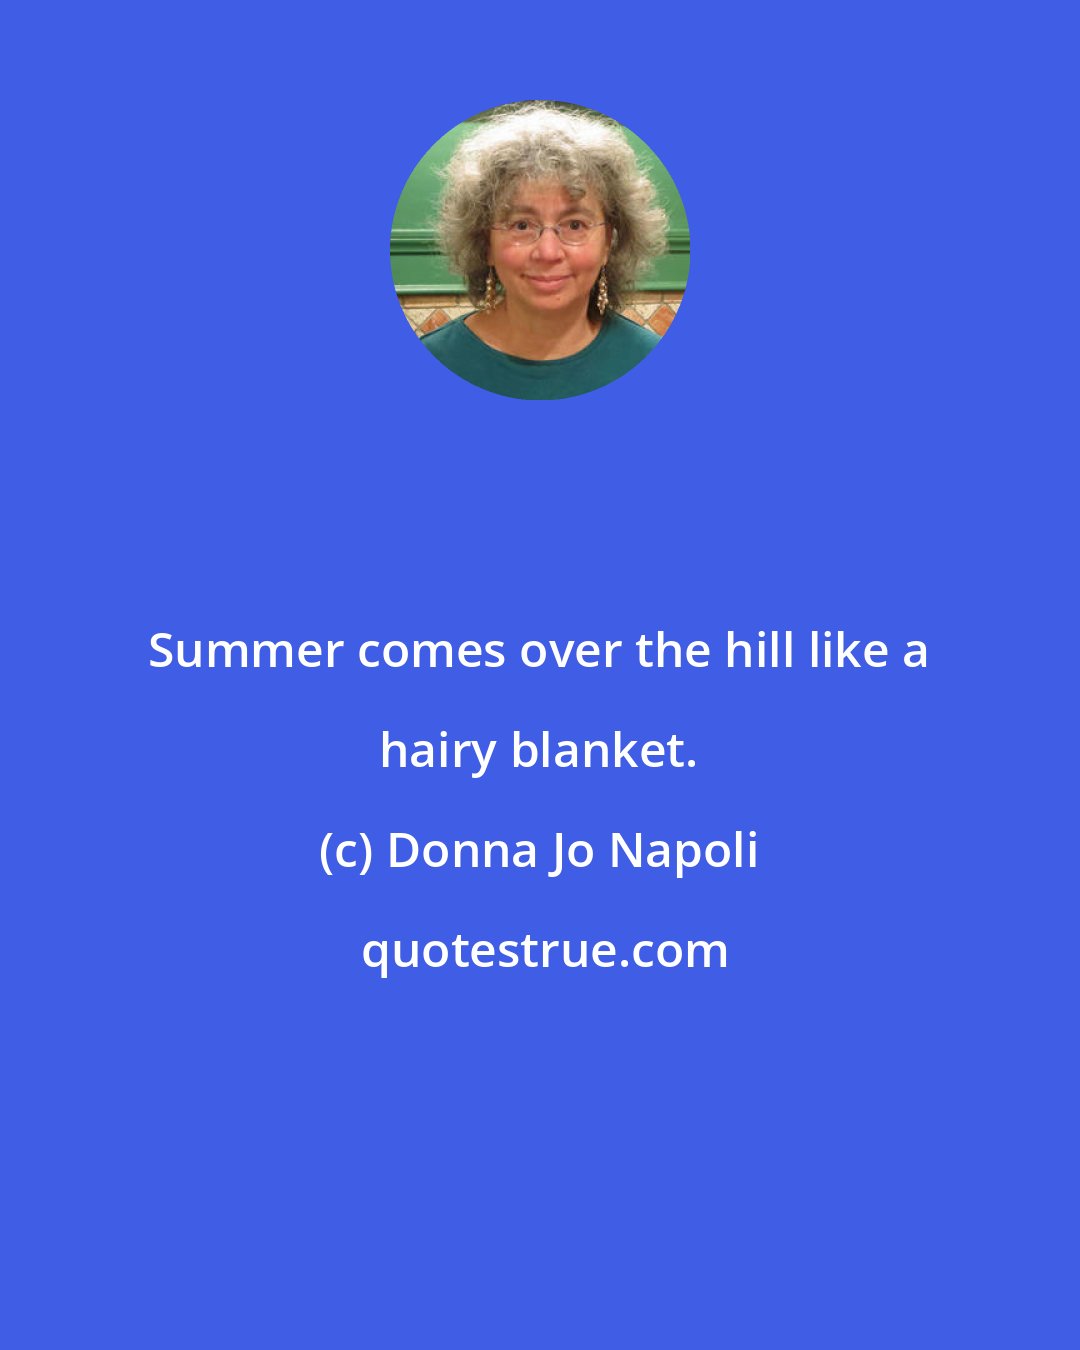 Donna Jo Napoli: Summer comes over the hill like a hairy blanket.